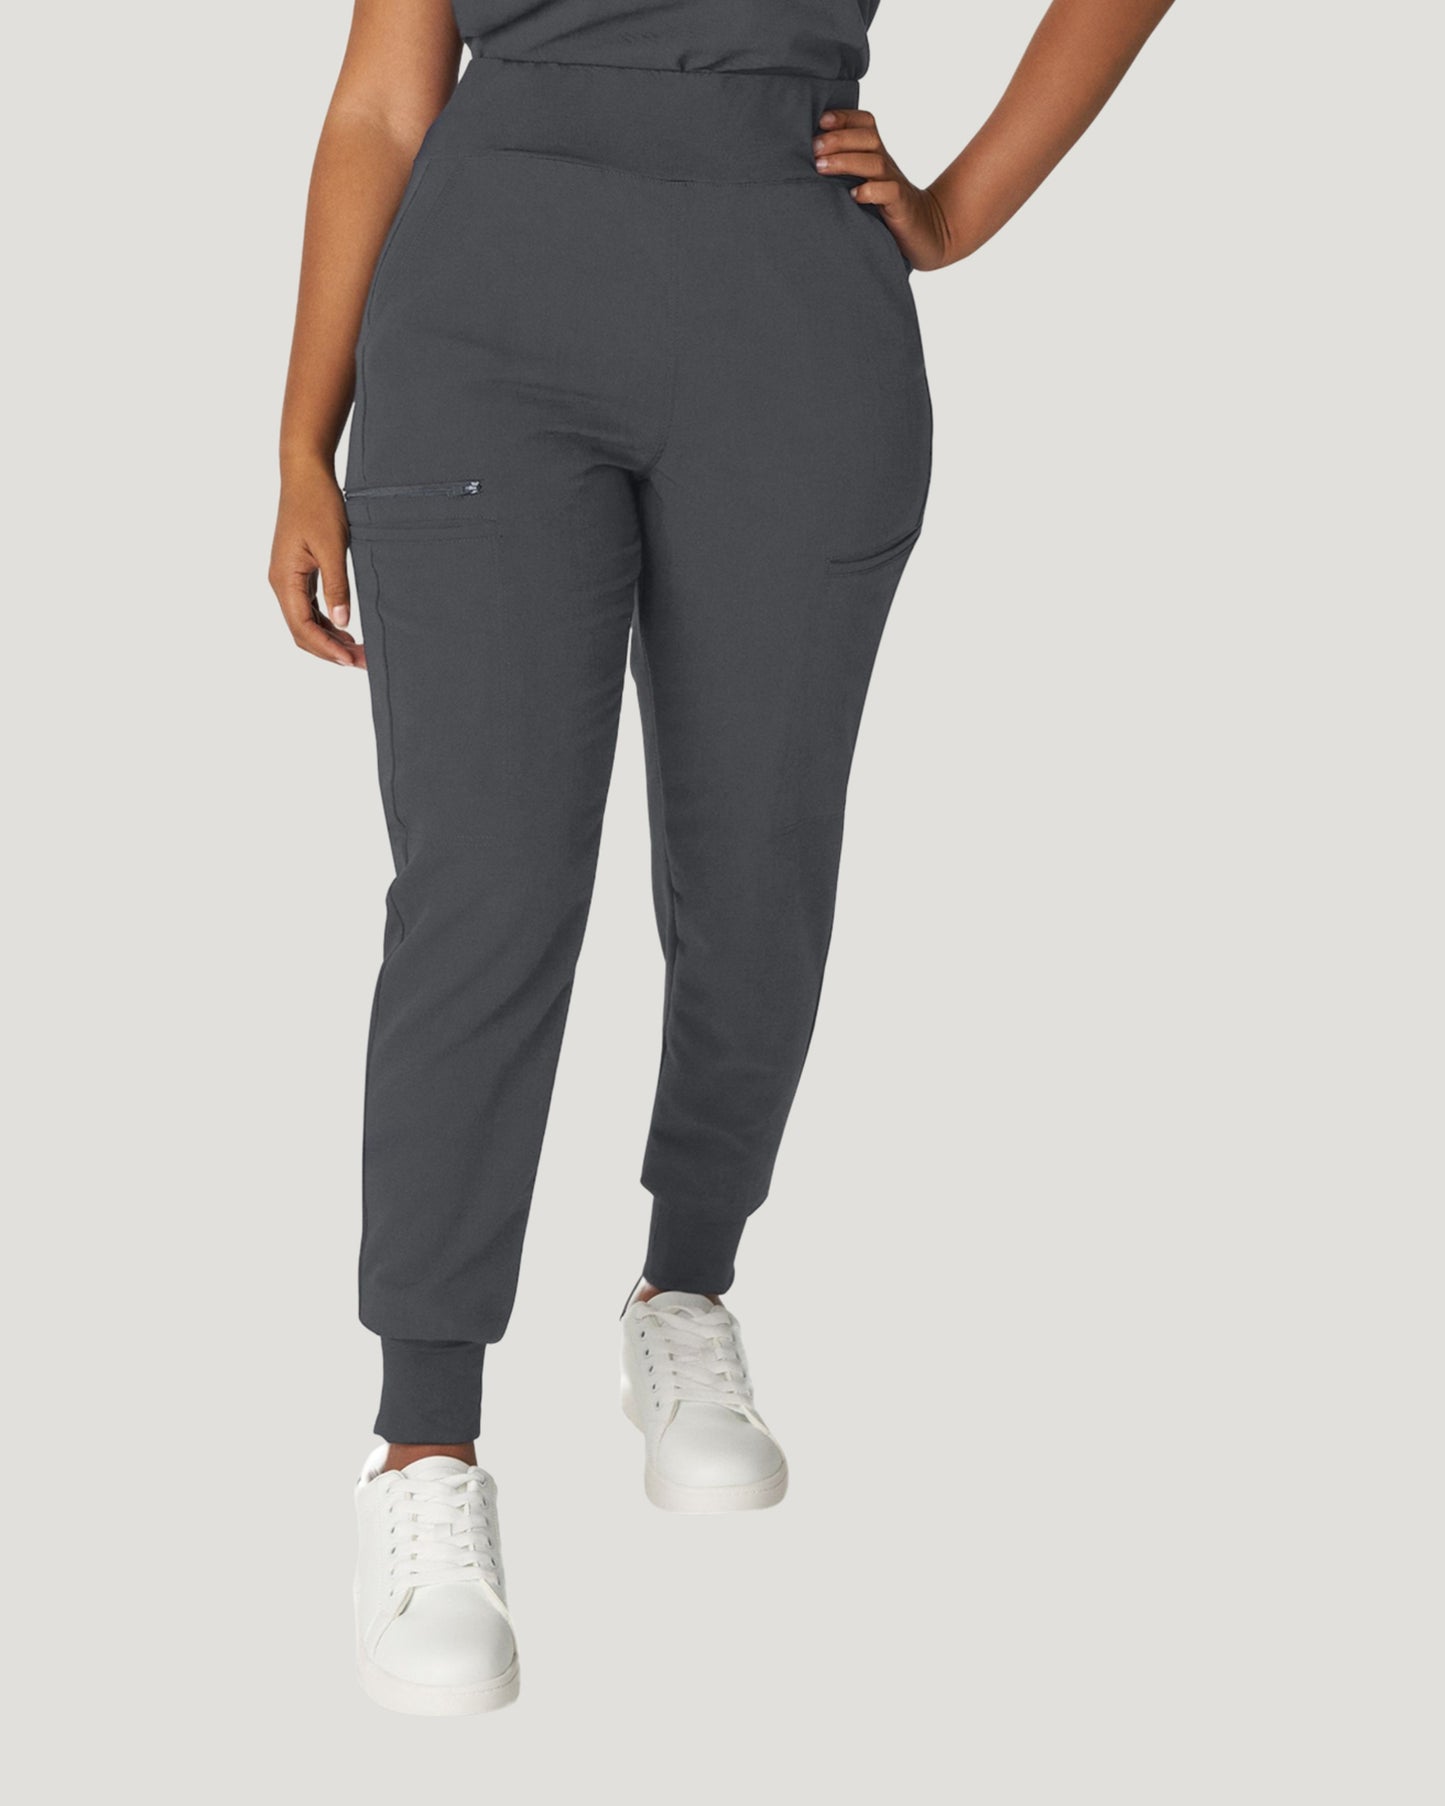 White Cross V-Tess WB410 Jogger Pants with Jersey Knit Contrast 6 Pockets